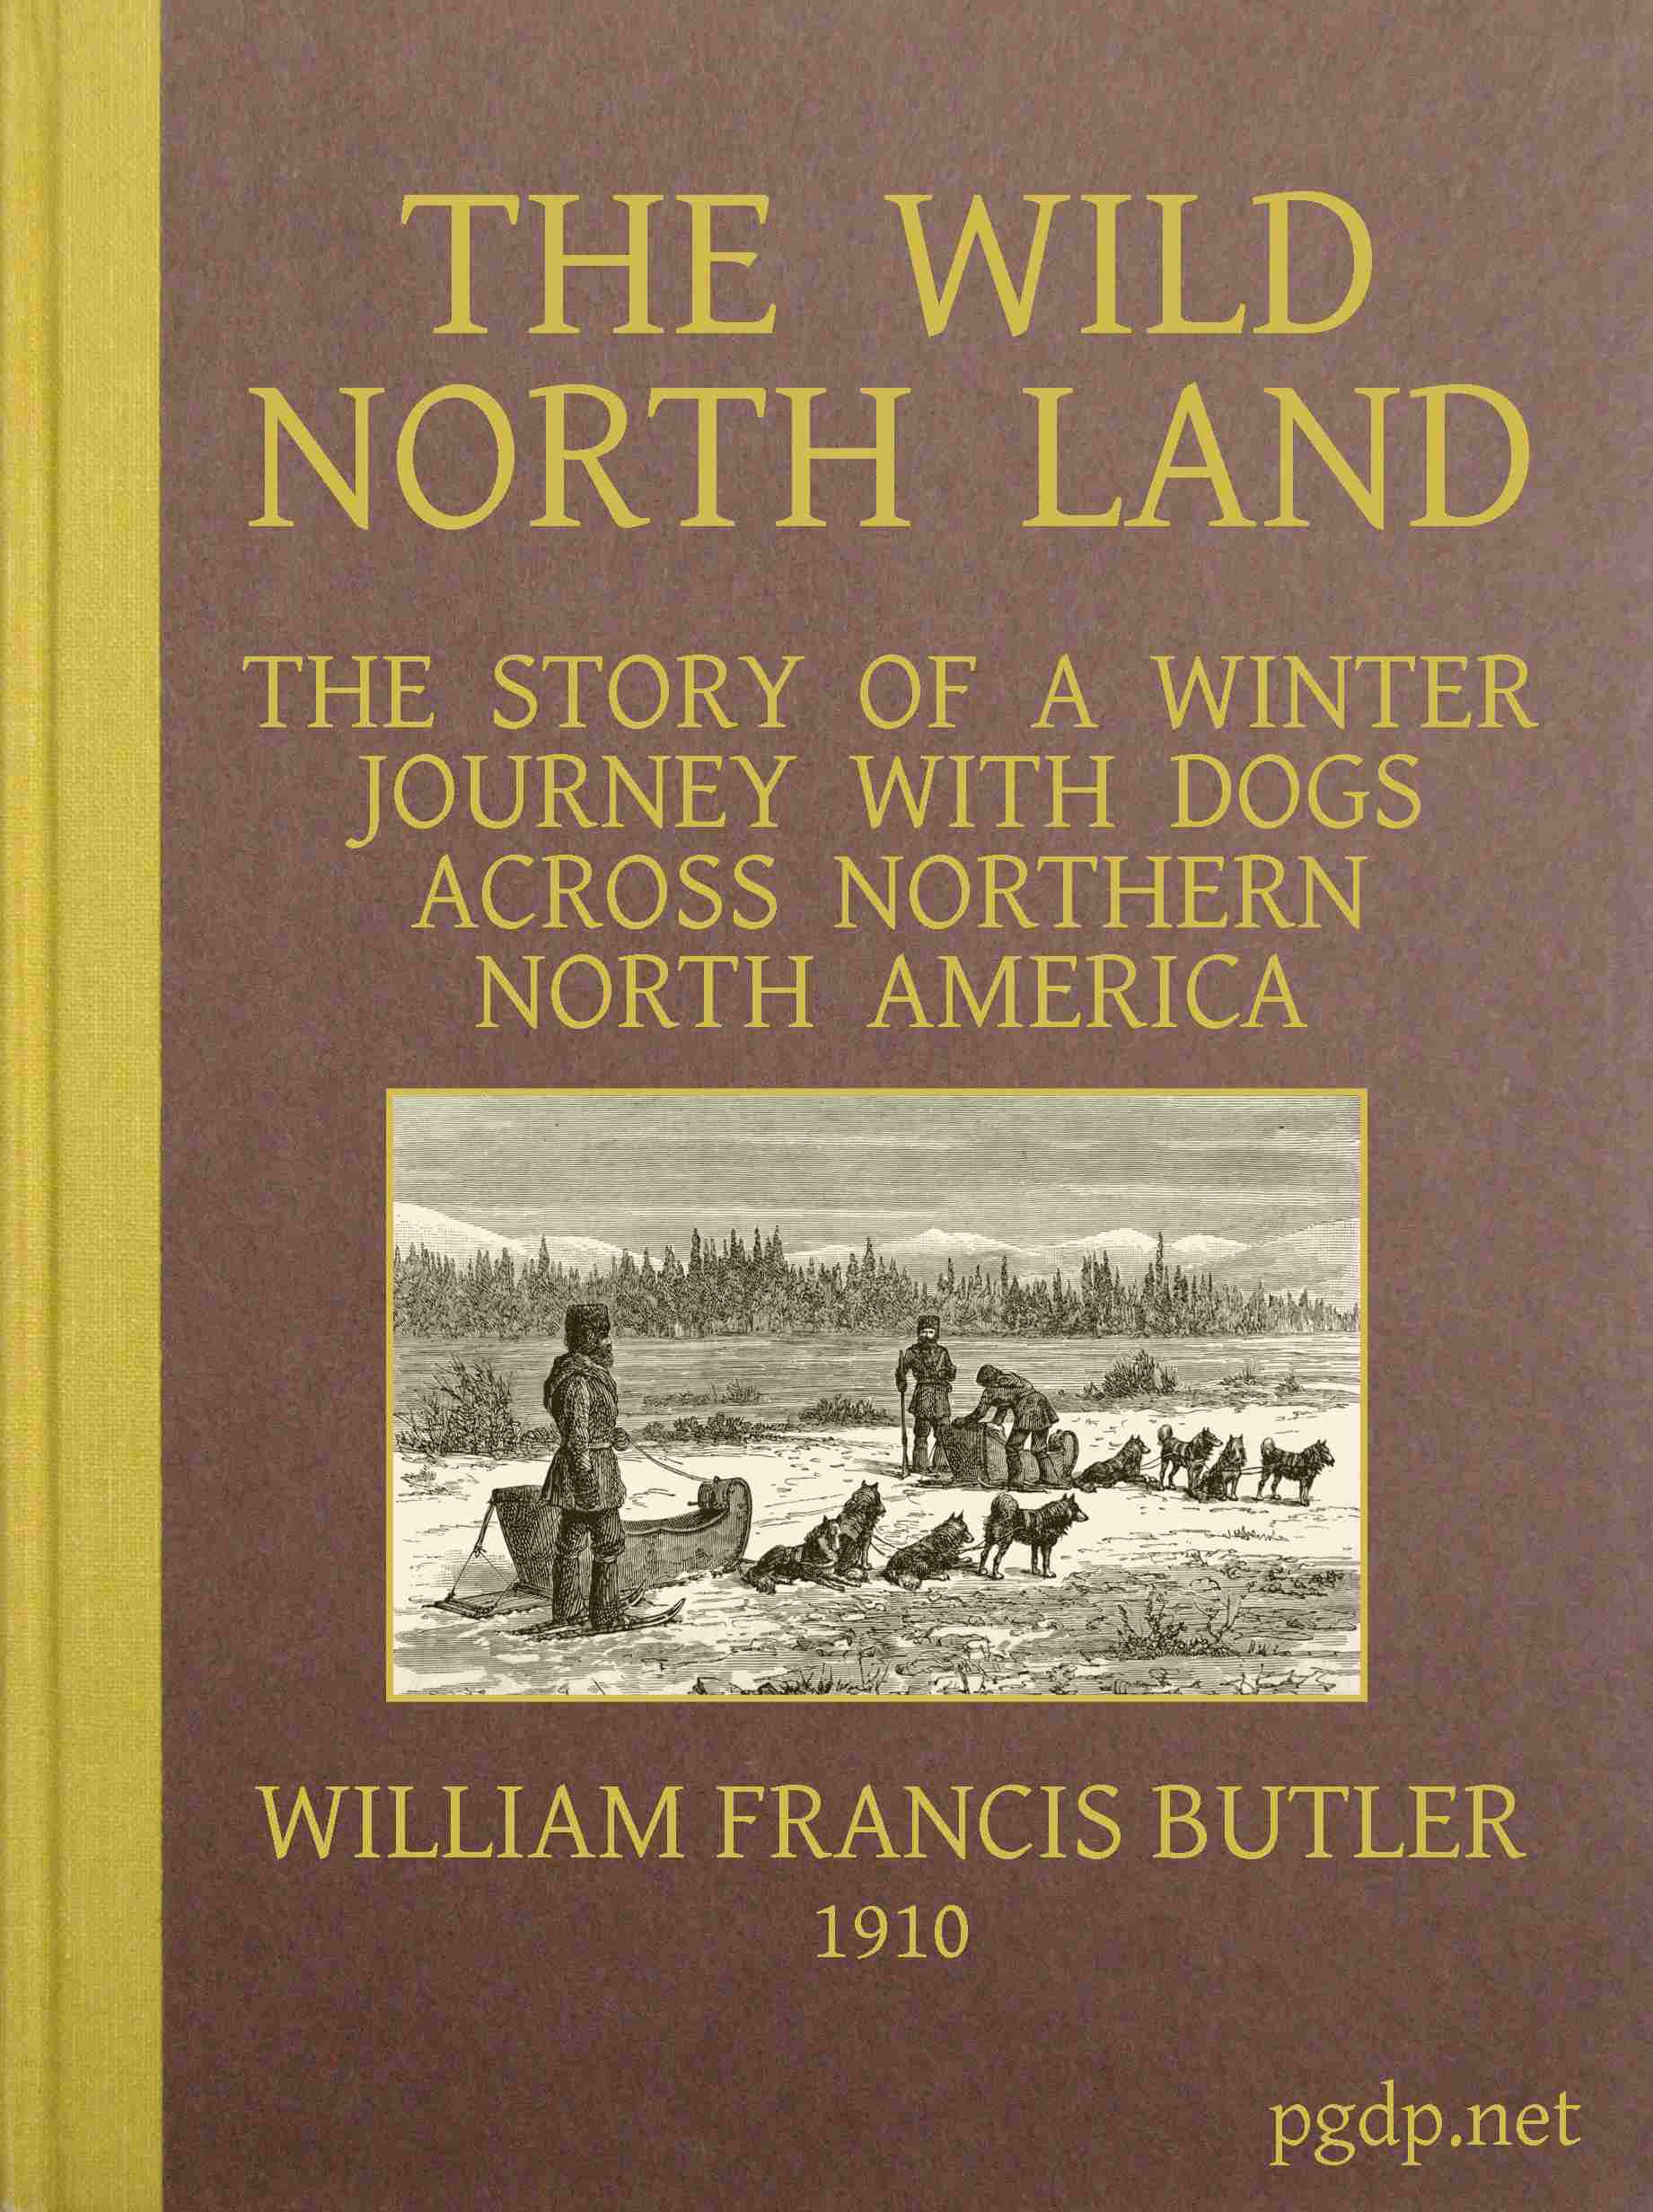 The Wild North Land&#10;The Story of a Winter Journey with Dogs across Northern North America